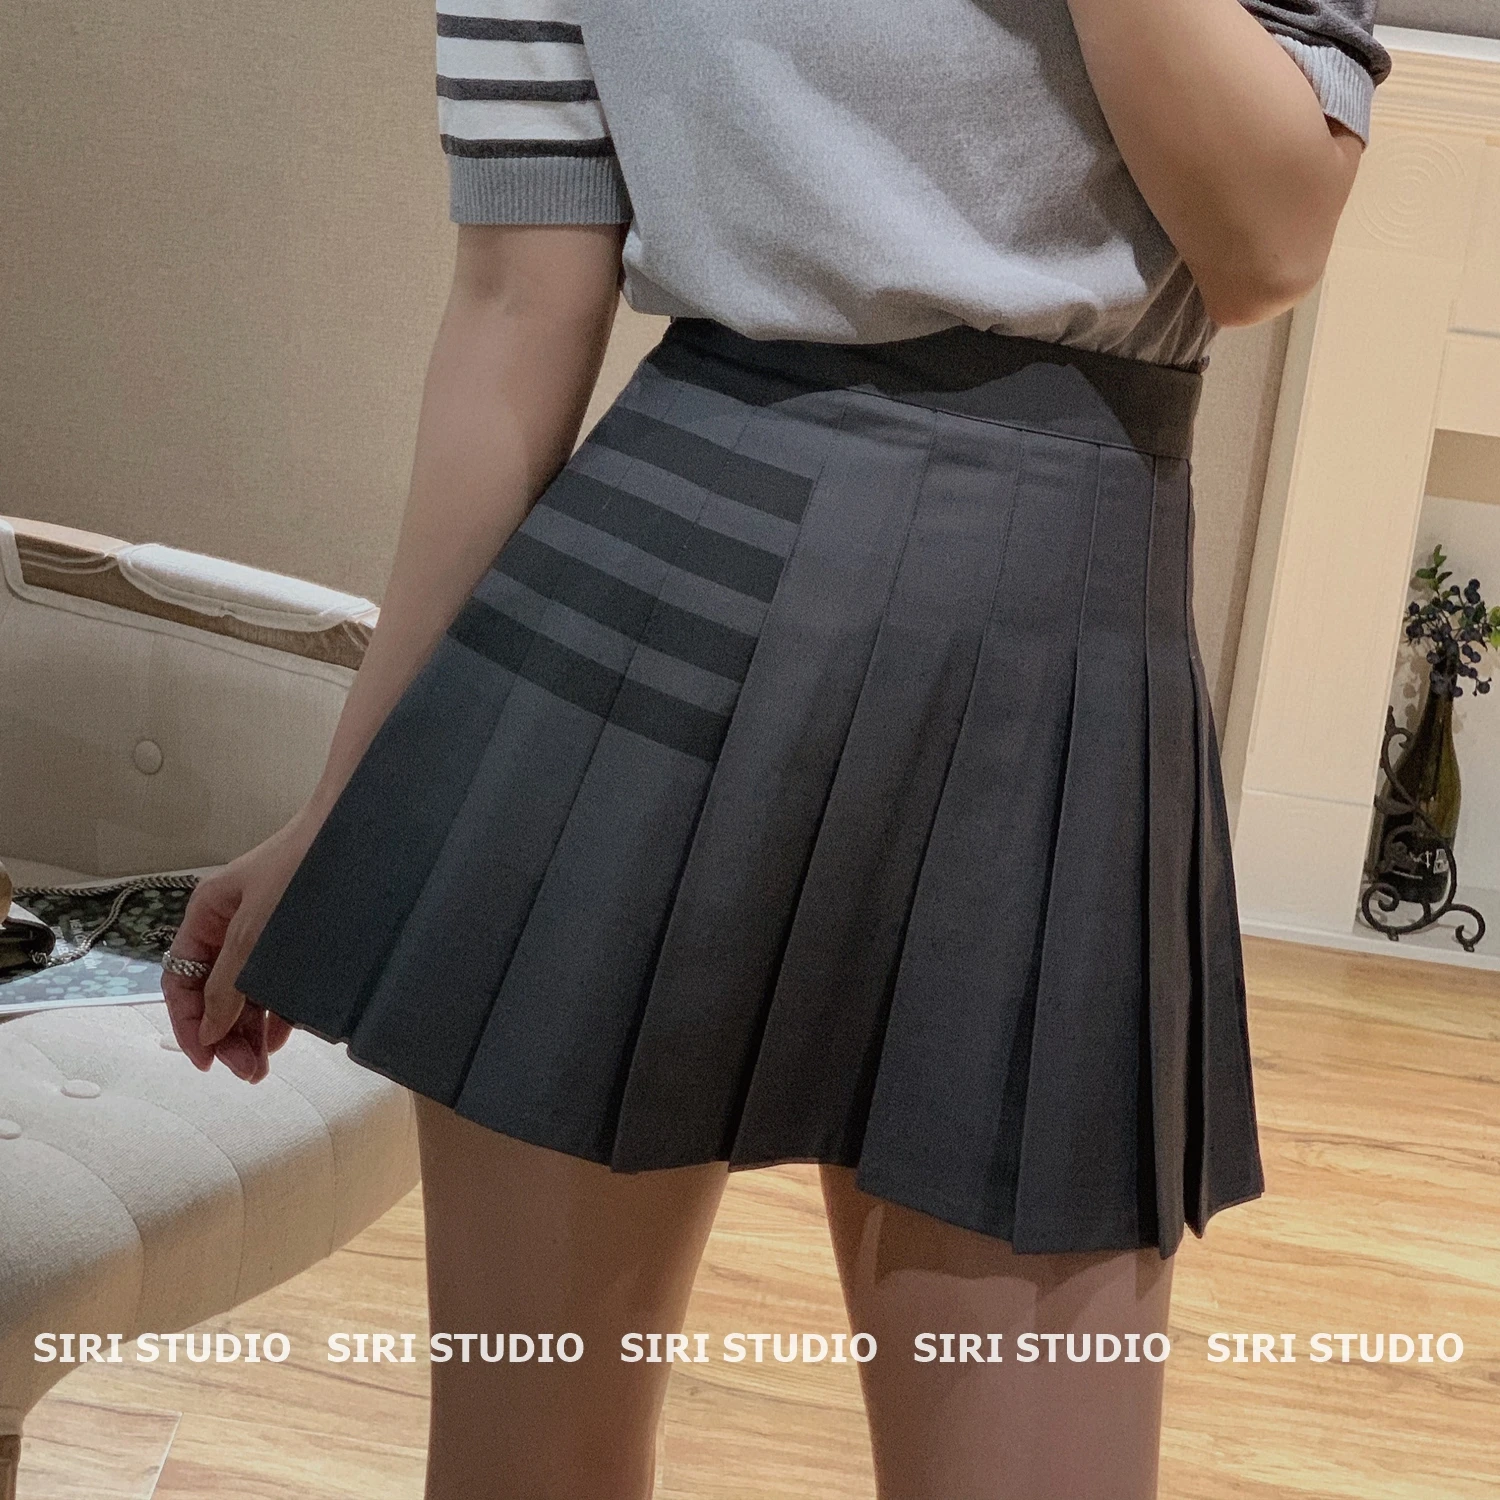 tb gray suit skirt high waist and thin A-line pleated skirt college style retro four-bar striped short skirt skirt women american retro tooling pocket jeans women s high waist thin and high personality trend all match straight pants